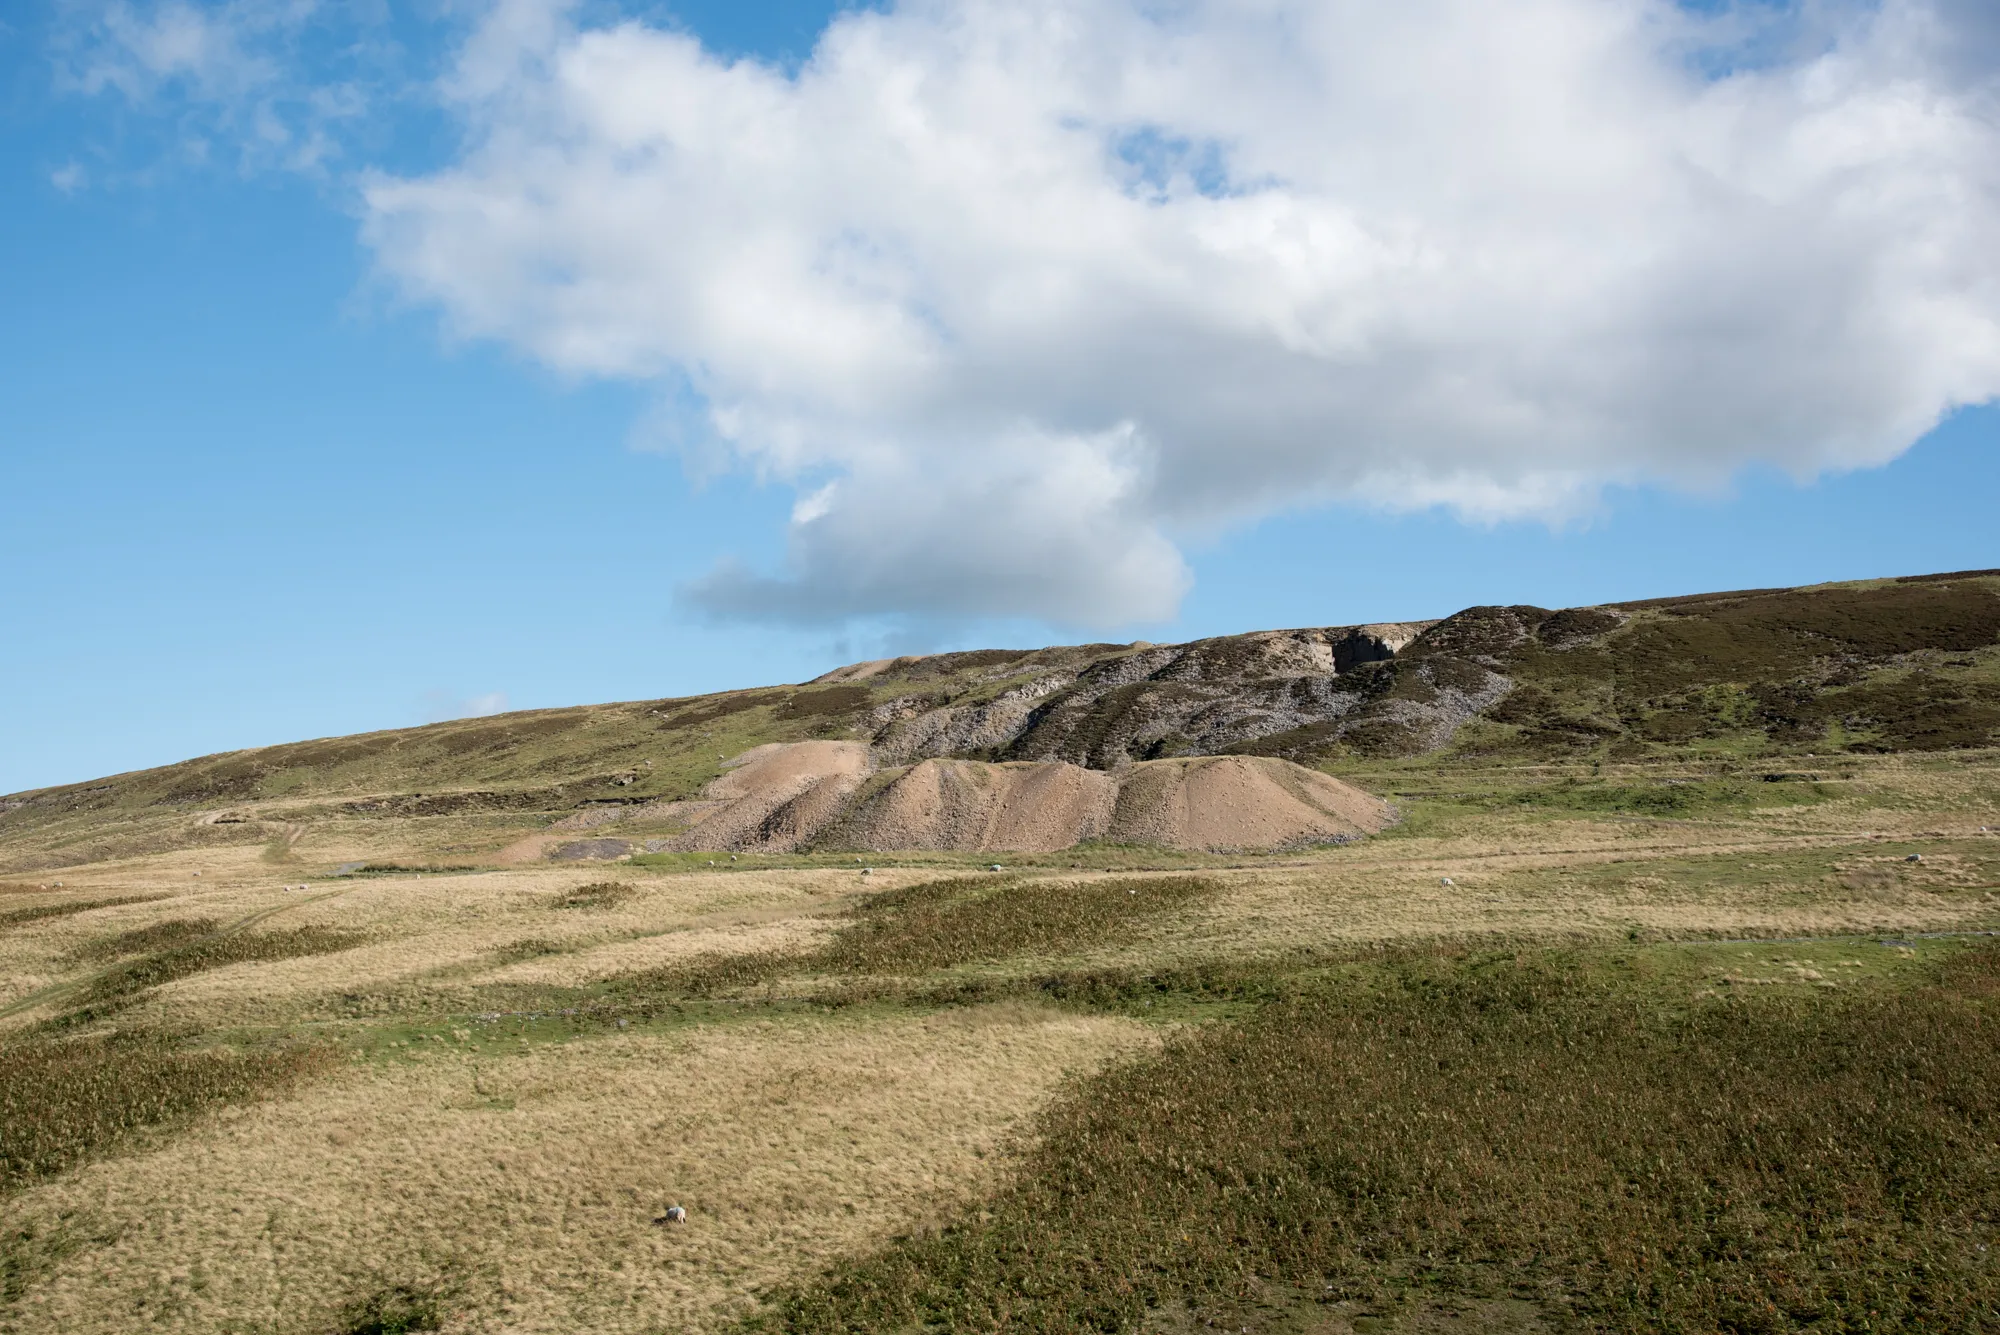 Photo showing: Mine site at Whitfield Brow. The mine site as viewed across the Howden Burn. Obvious mining disturbance of the ground on the steep slope at Whitfield Brow with extensive spoil heaps below.